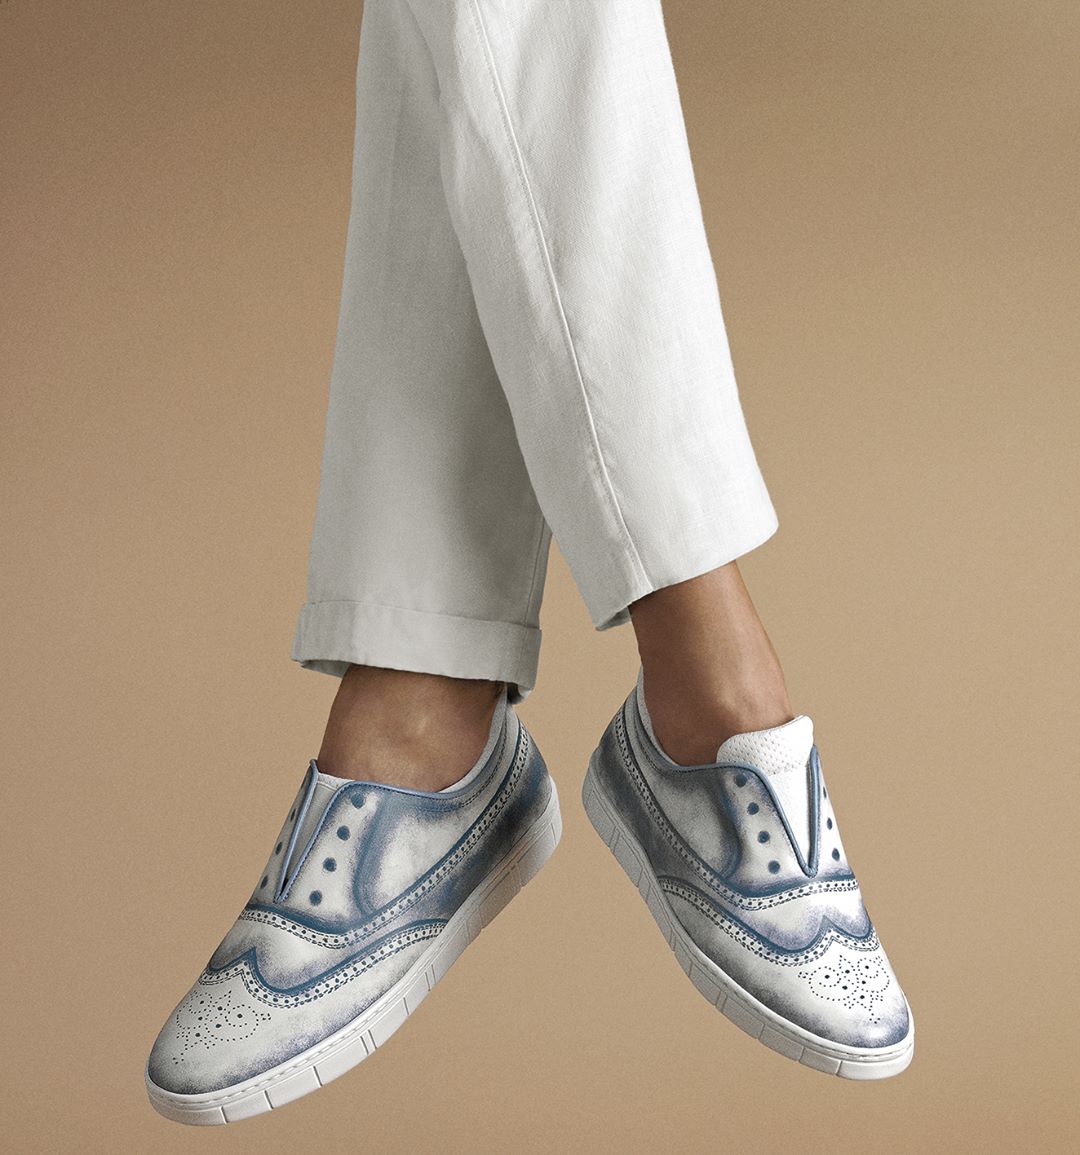 For Spring Summer 2019, the men’s and women’s Shadow sneakers come in light blue in the Simple Beauty by the Sea collection. 